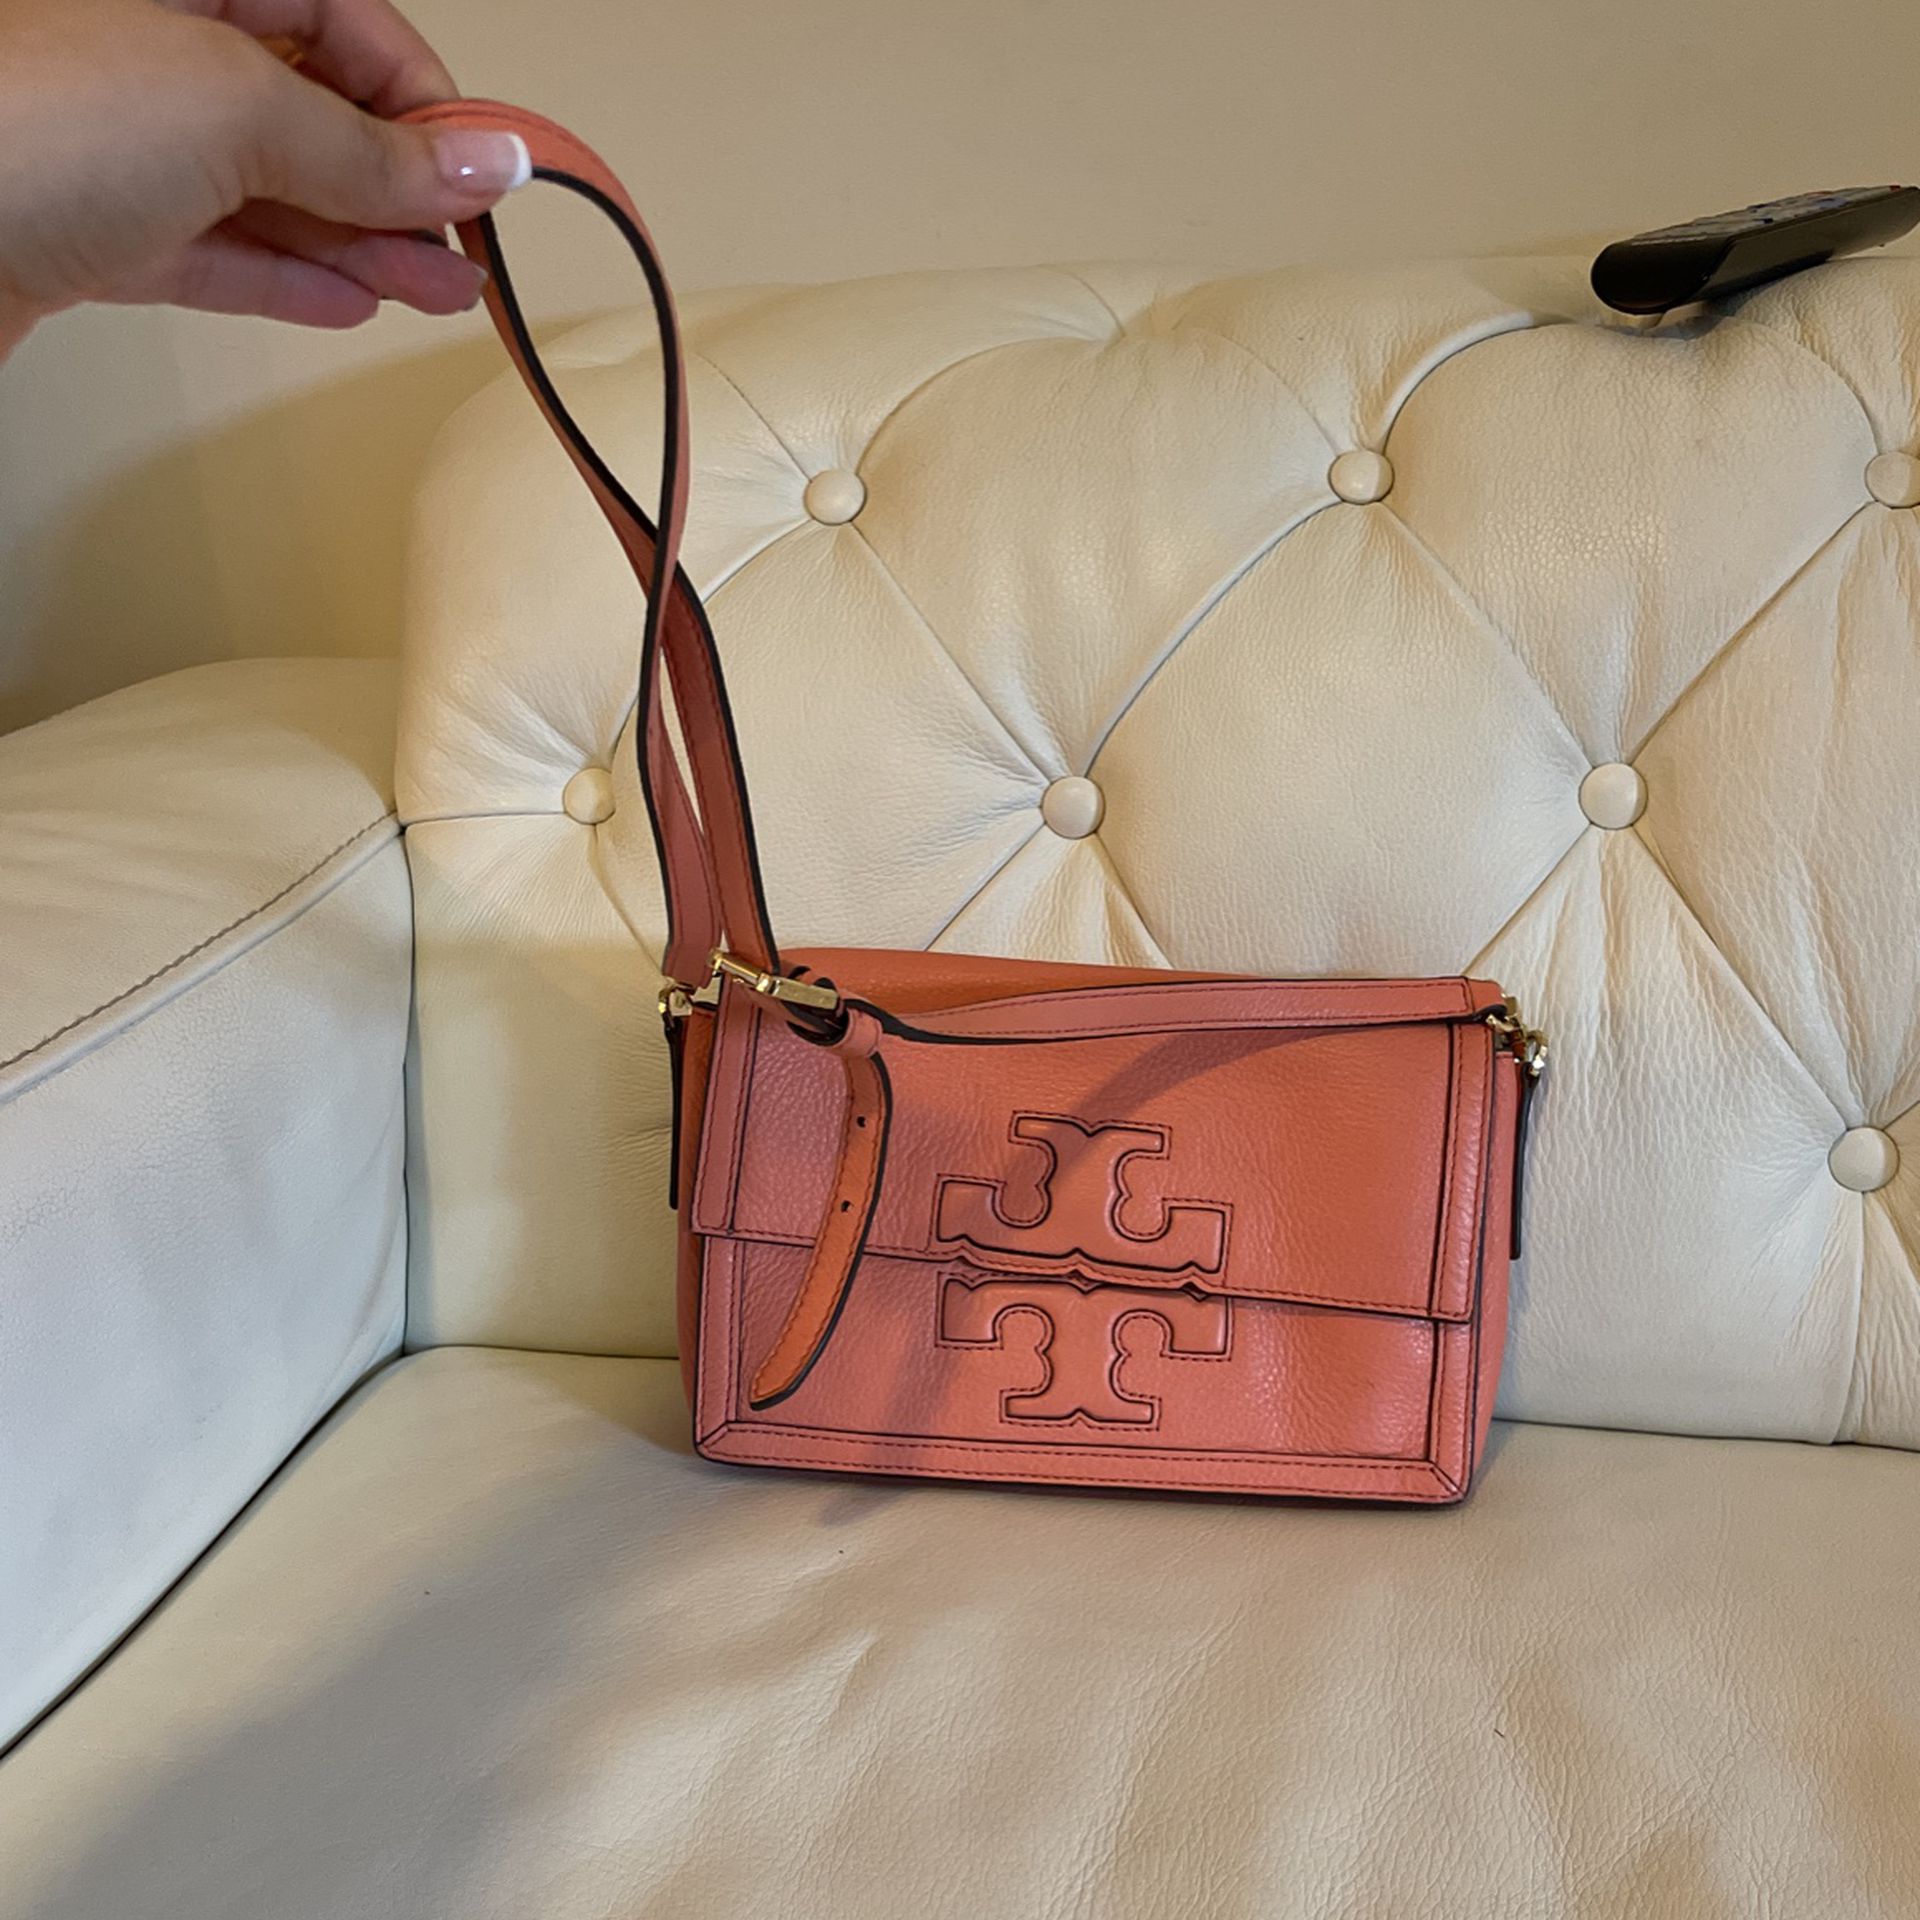 Authentic Tory Burch Bag for Sale in Pompano Beach, FL - OfferUp